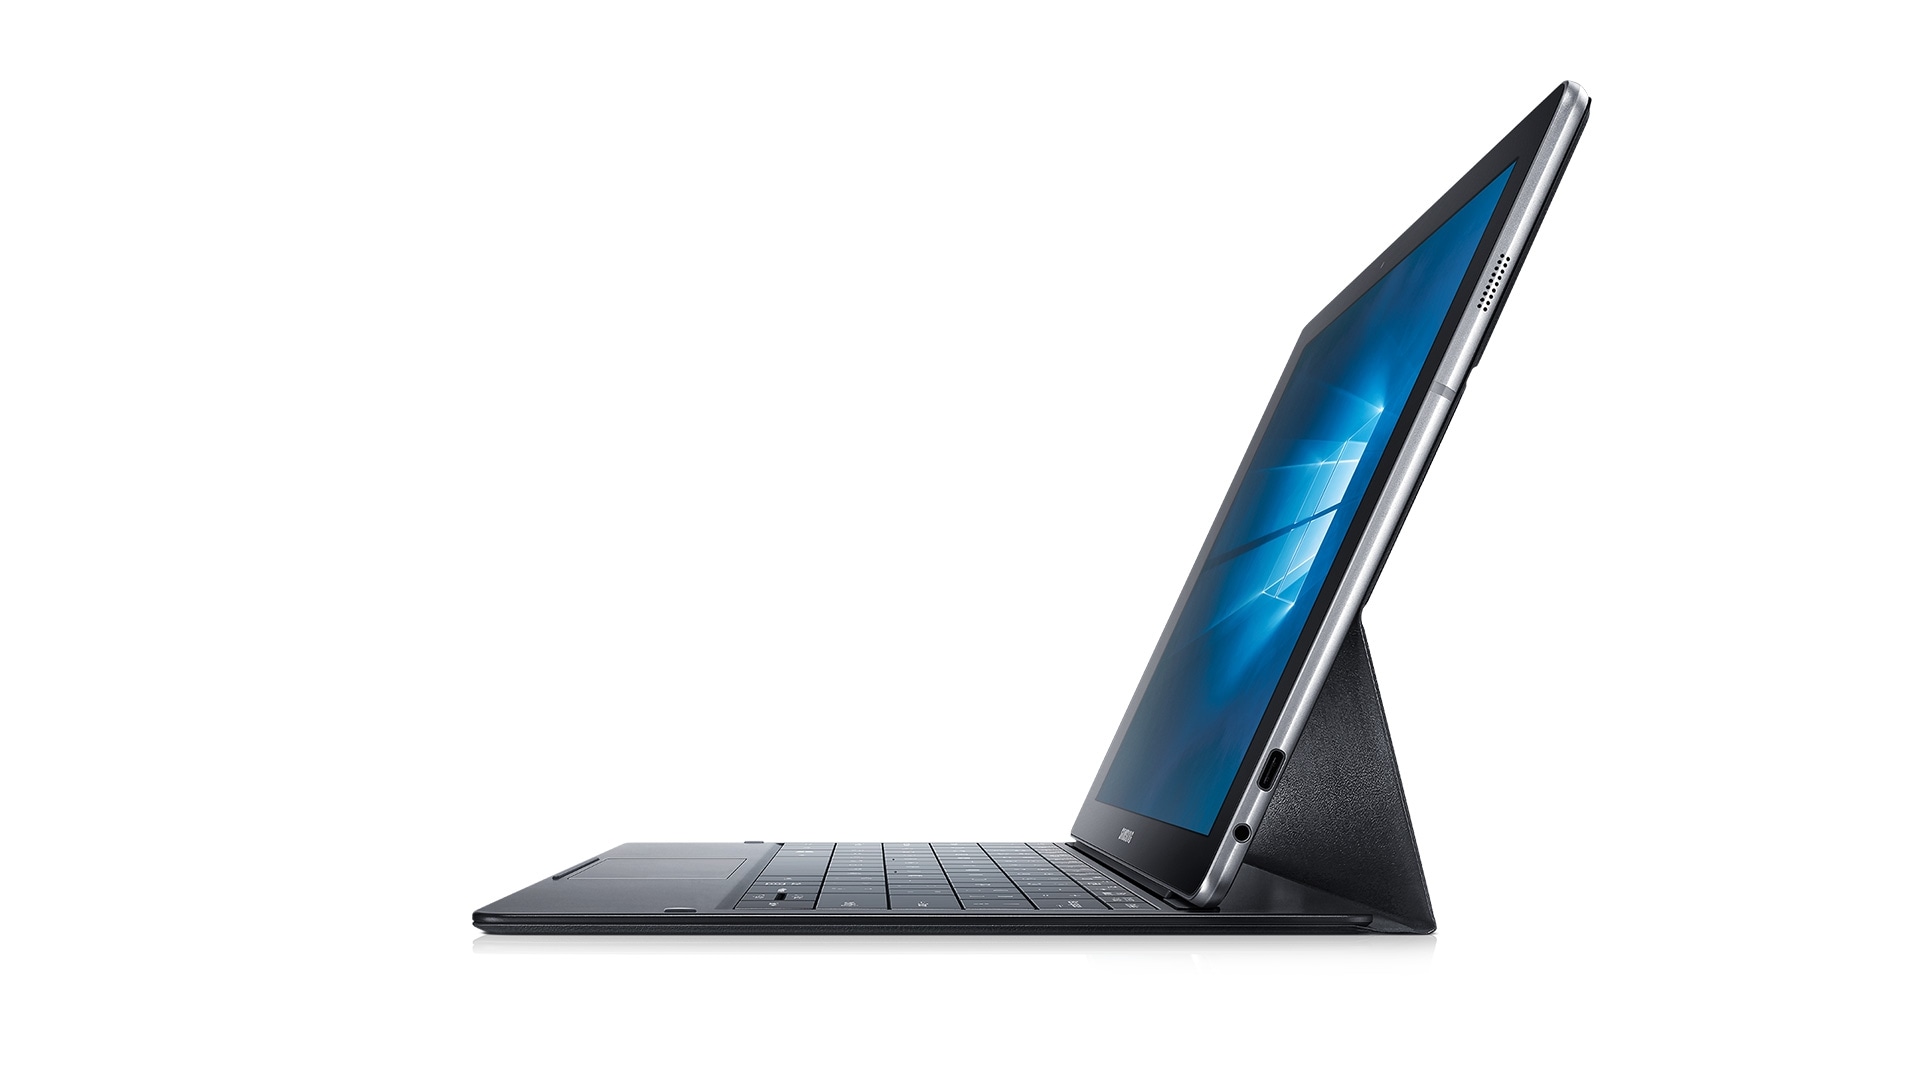 Angled side view of Galaxy TabPro S